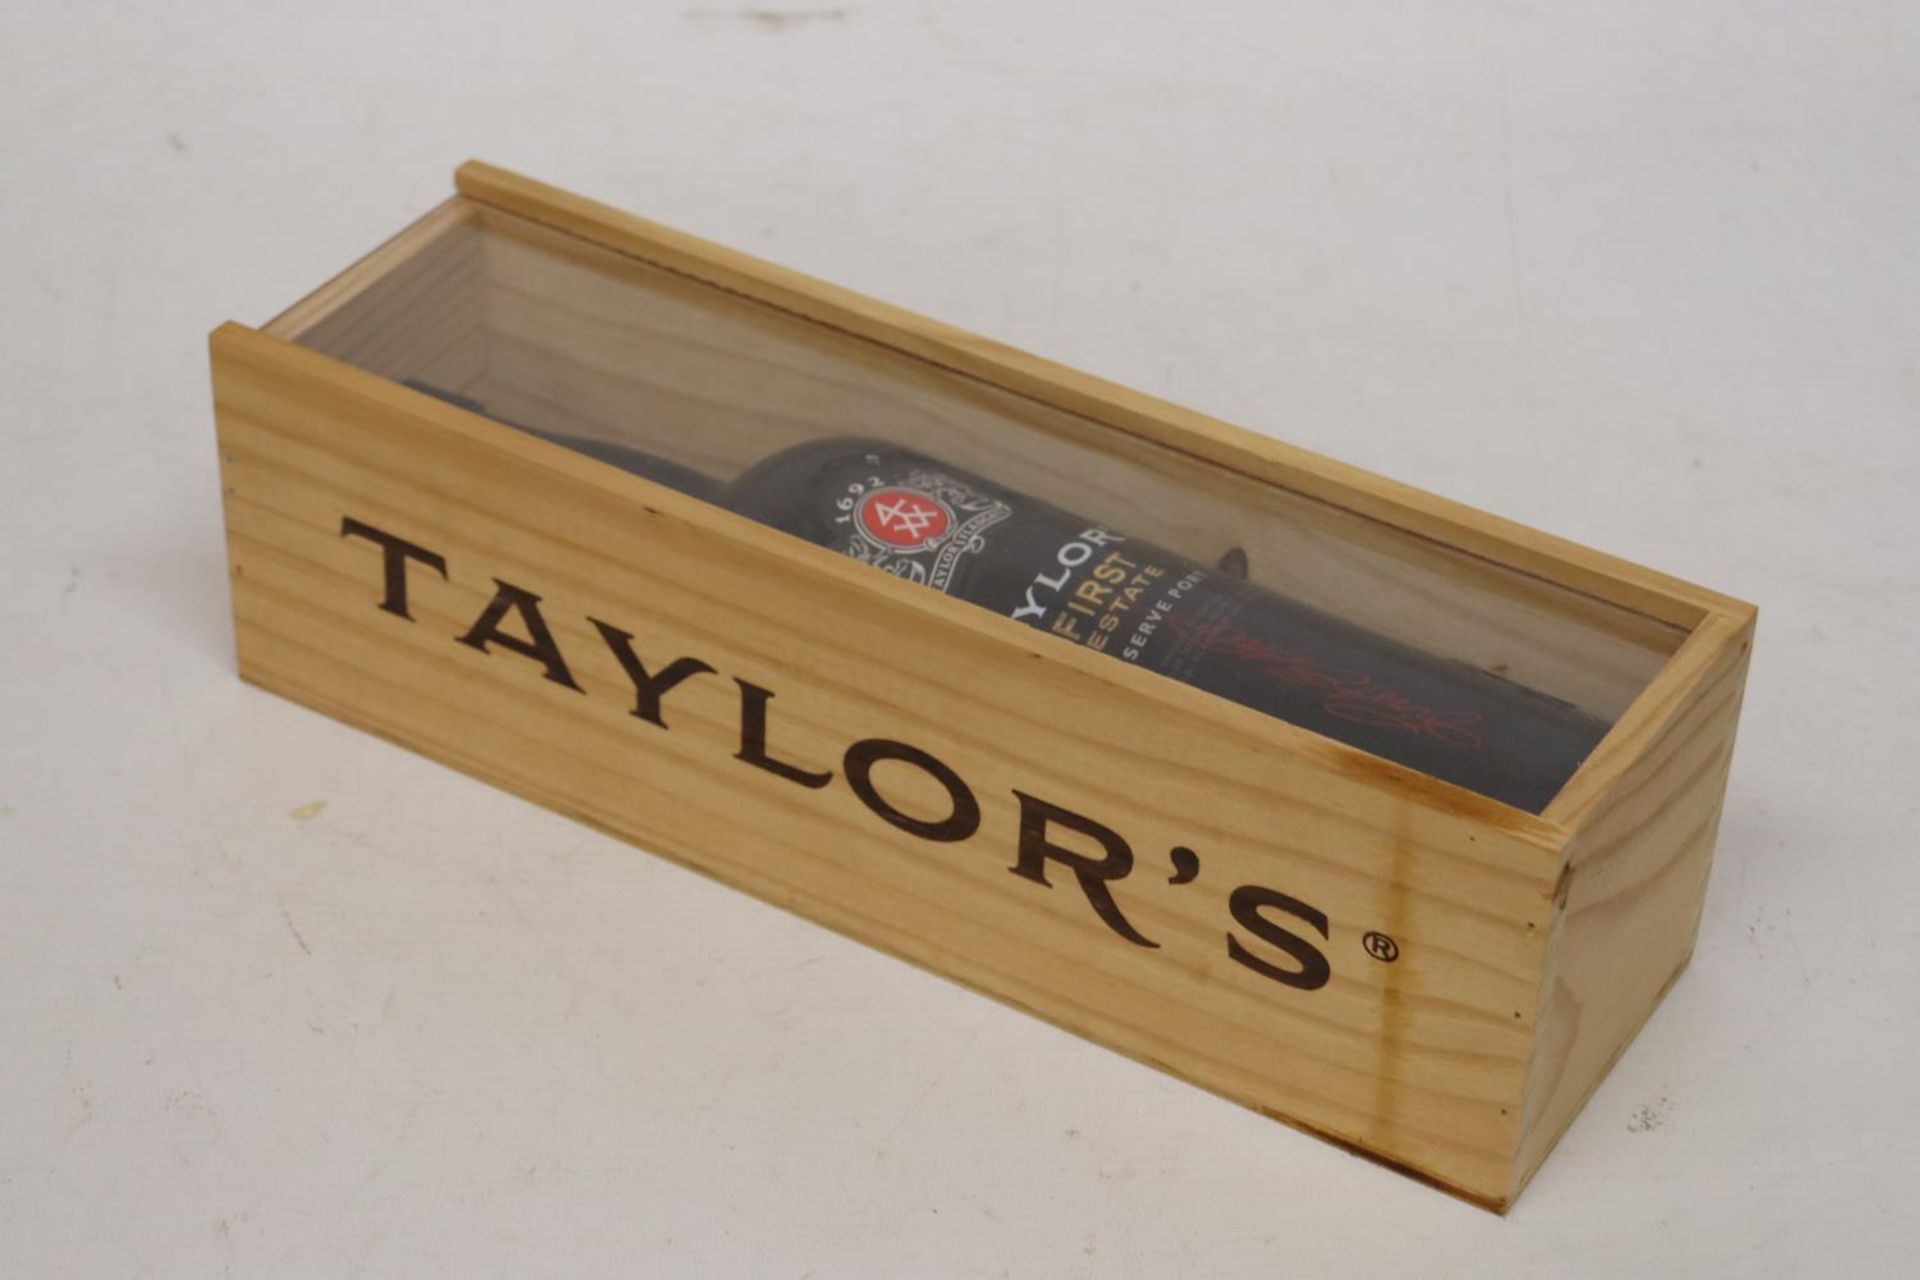 A BOTTLE OF TAYLORS 4XX FIRST ESTATE RESERVE PORT - Image 2 of 5